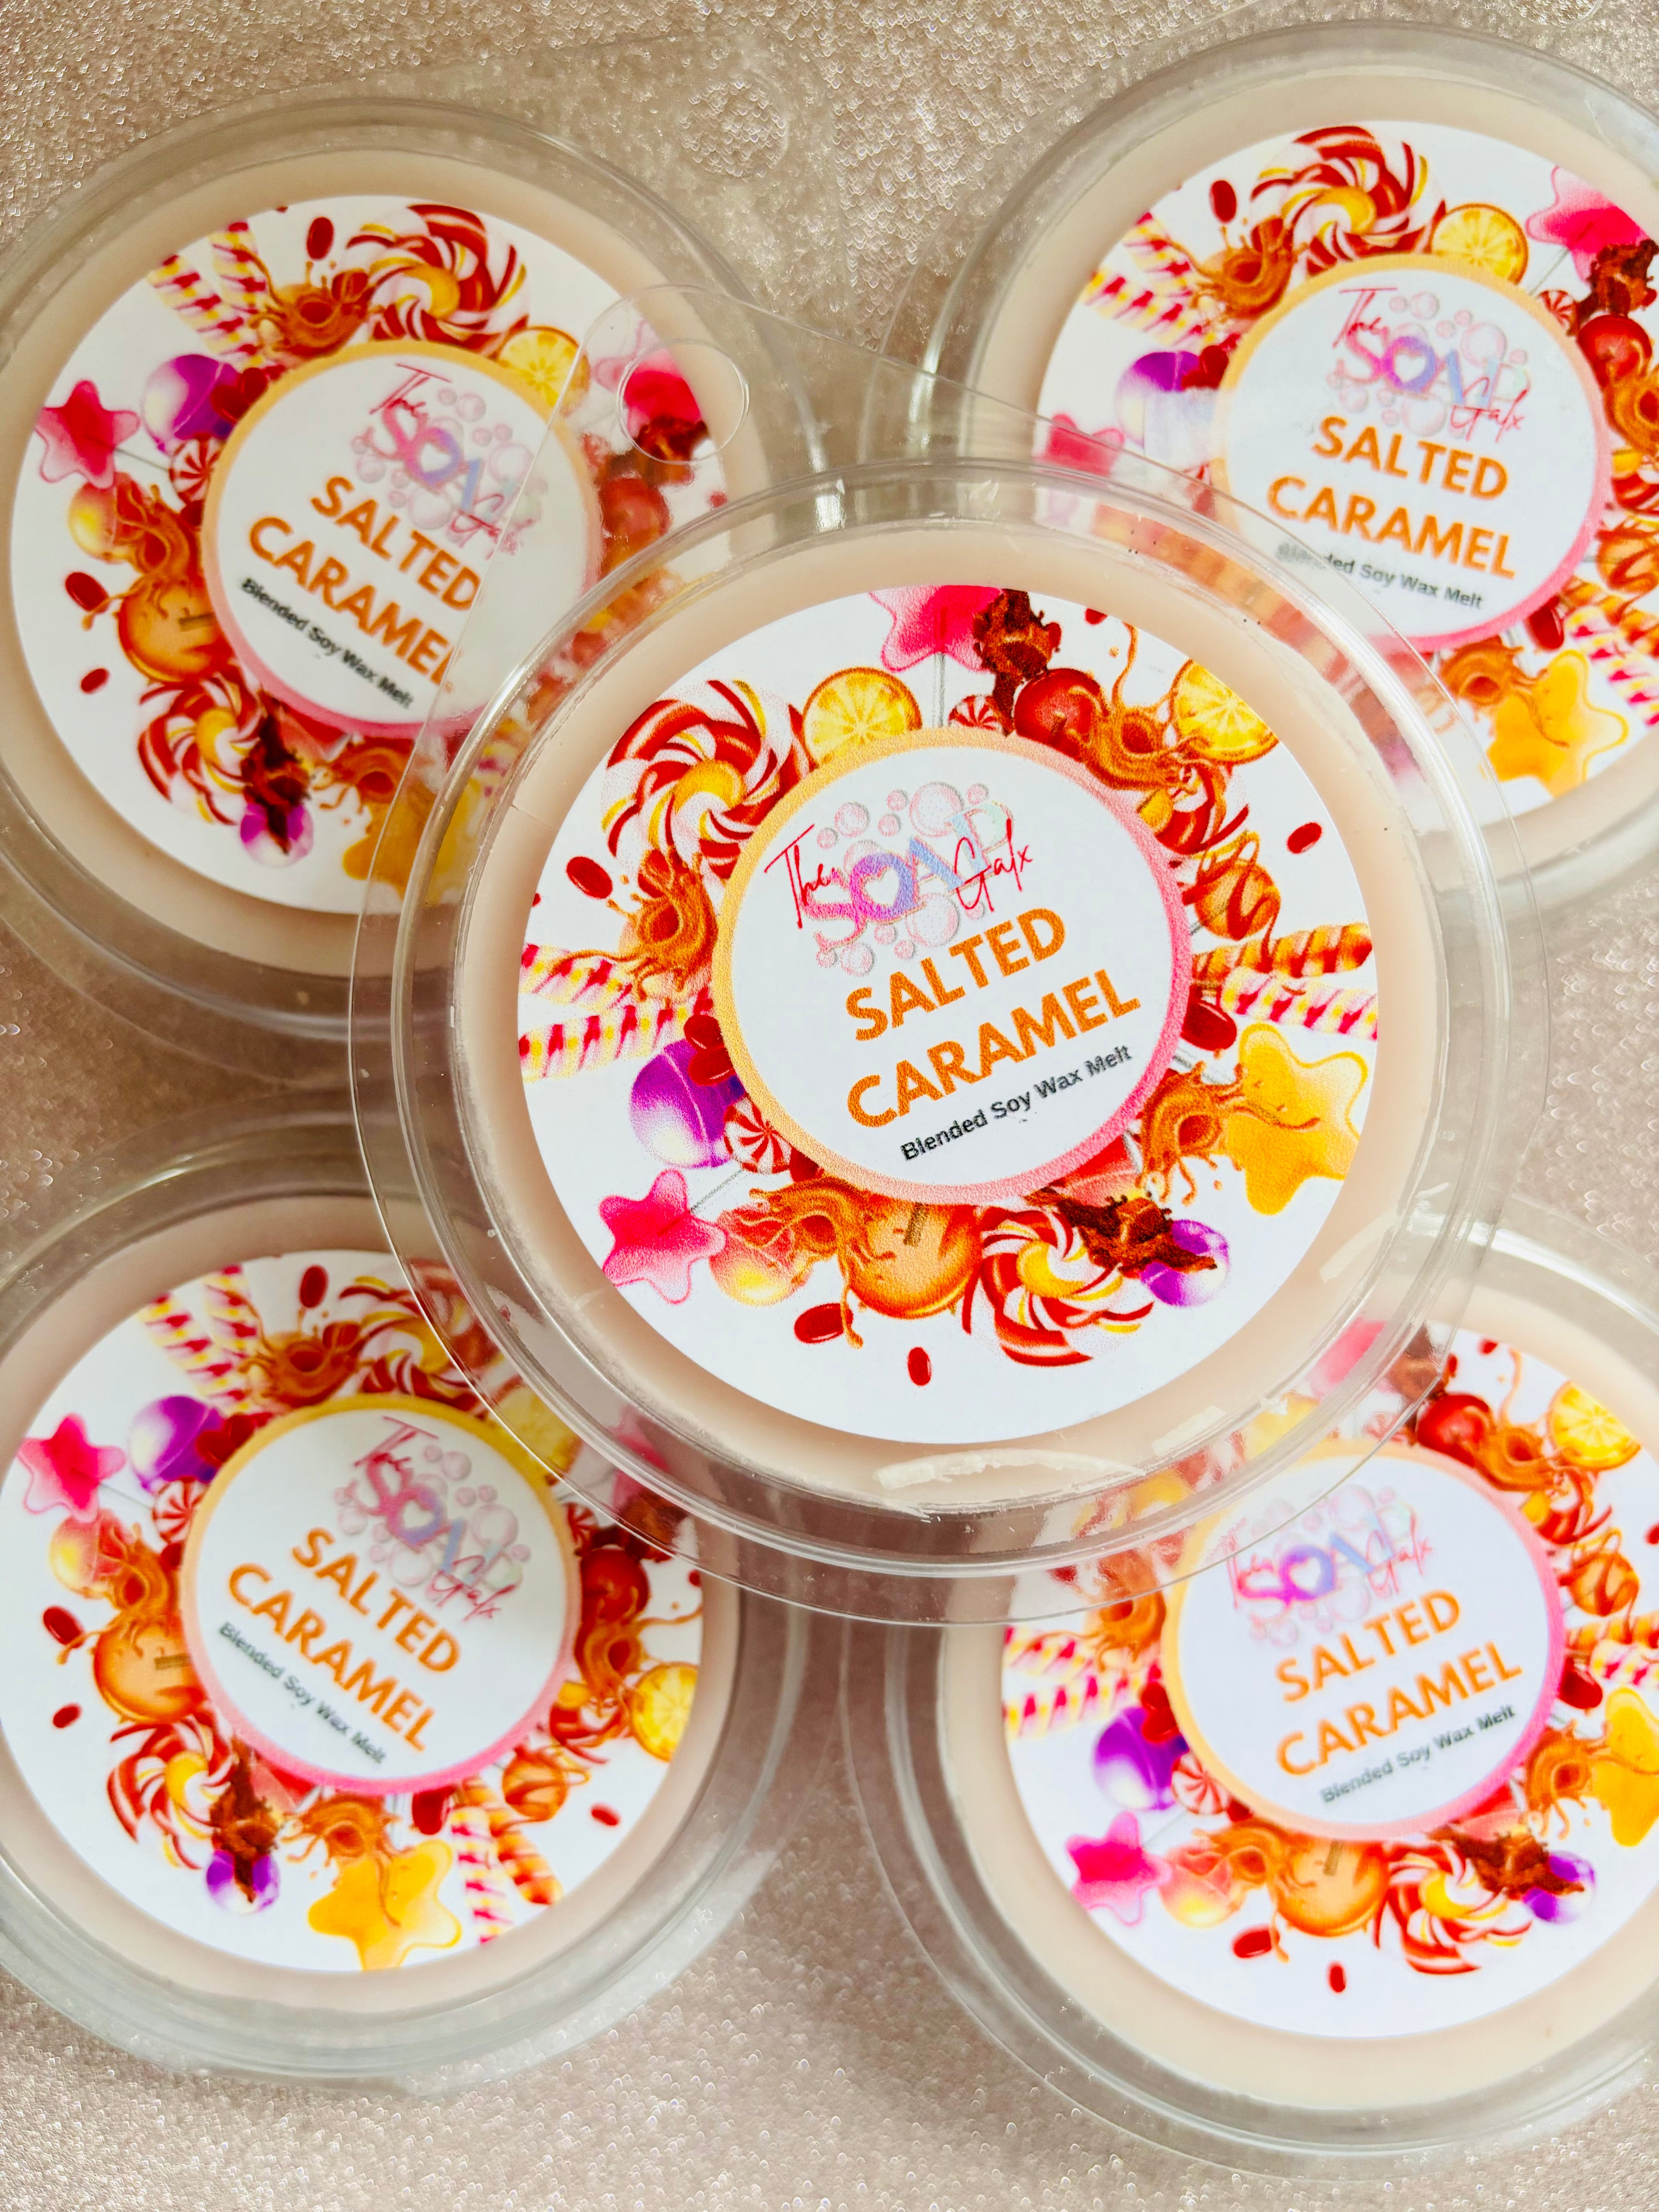 Stack of Salted Caramel Wax Melt containers with colorful labels in clamshell packaging by The Soap Gal x.